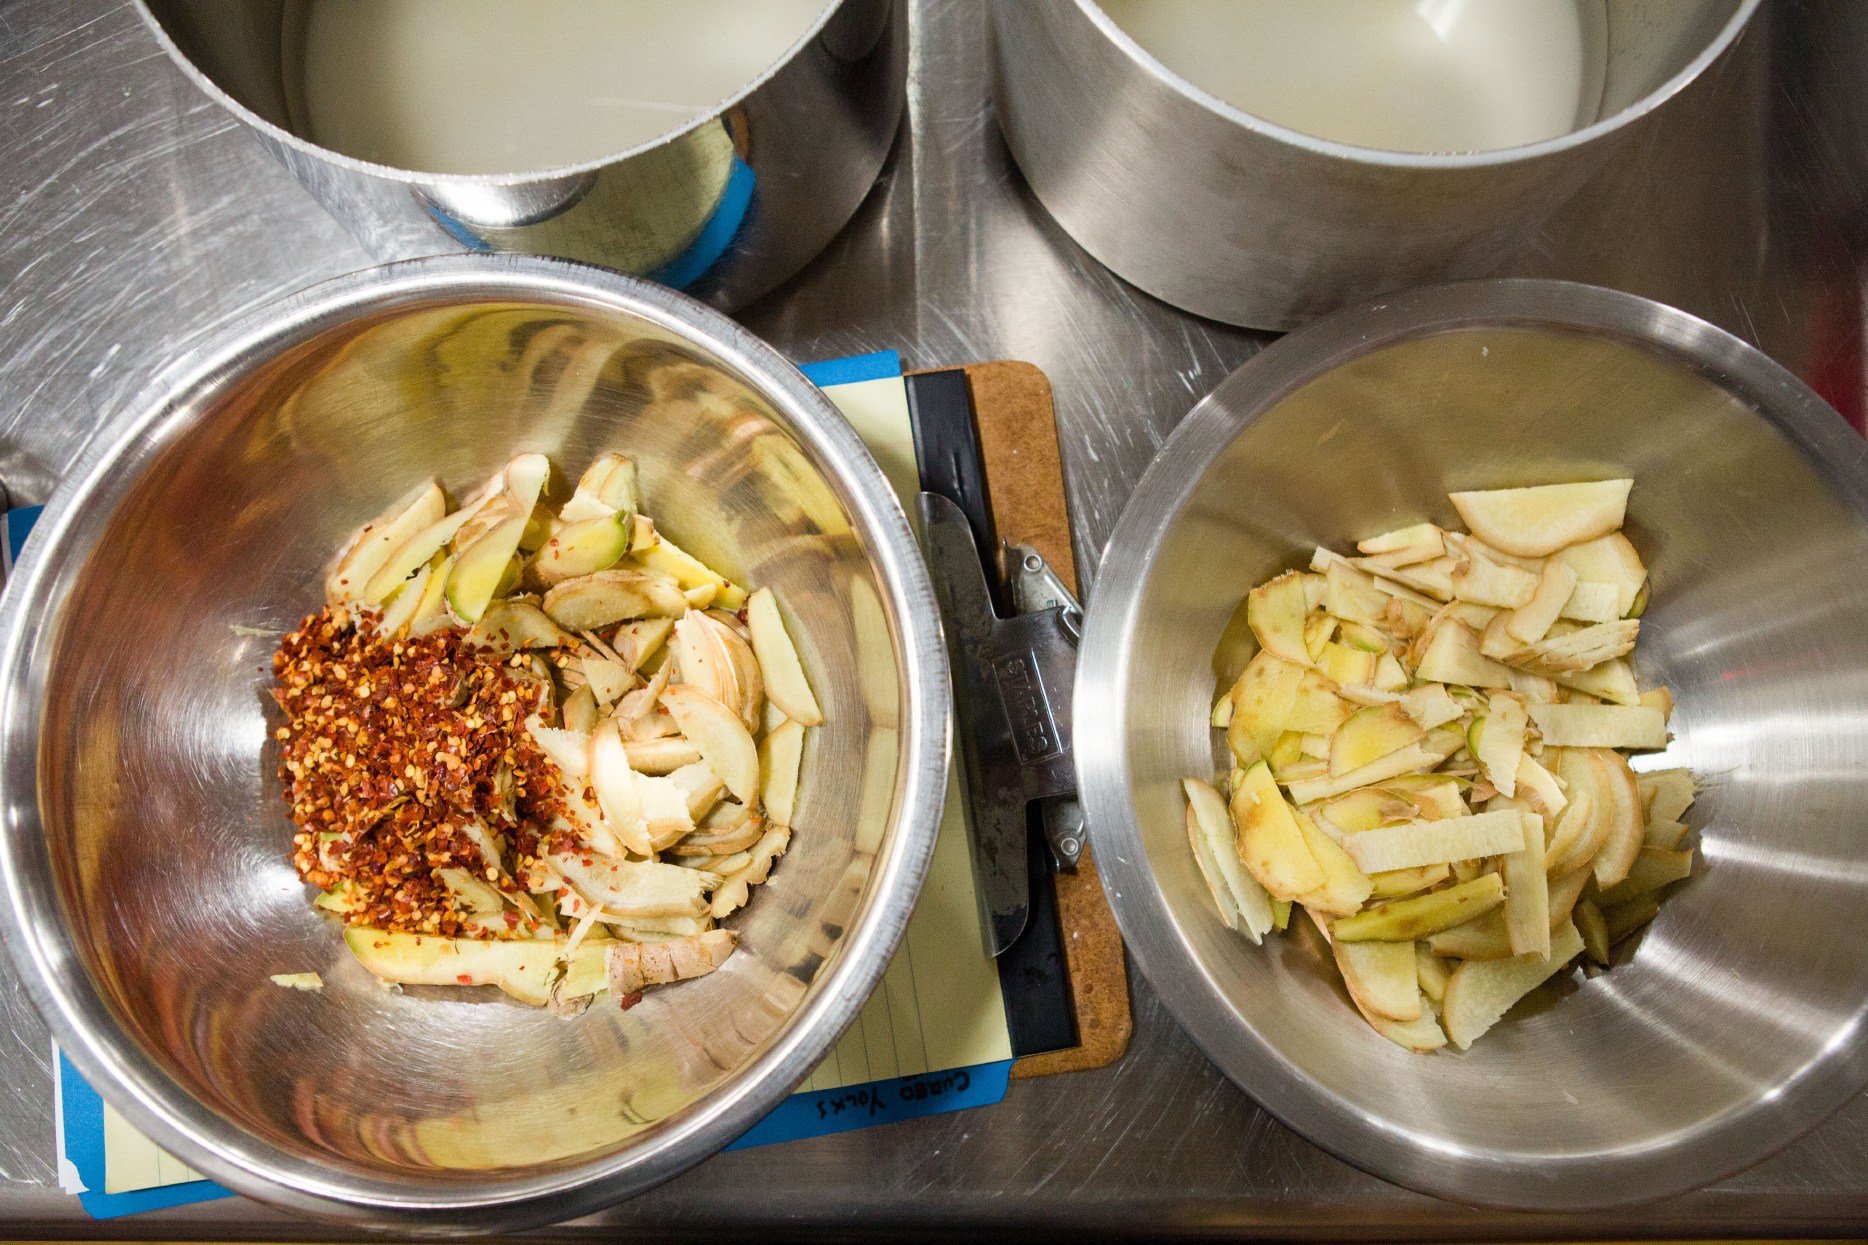 Sliced ginger with and without chili flakes sit ready to use as associate editor Tim Chin tests how to reintroduce some of the heat that is lost as the root ages.